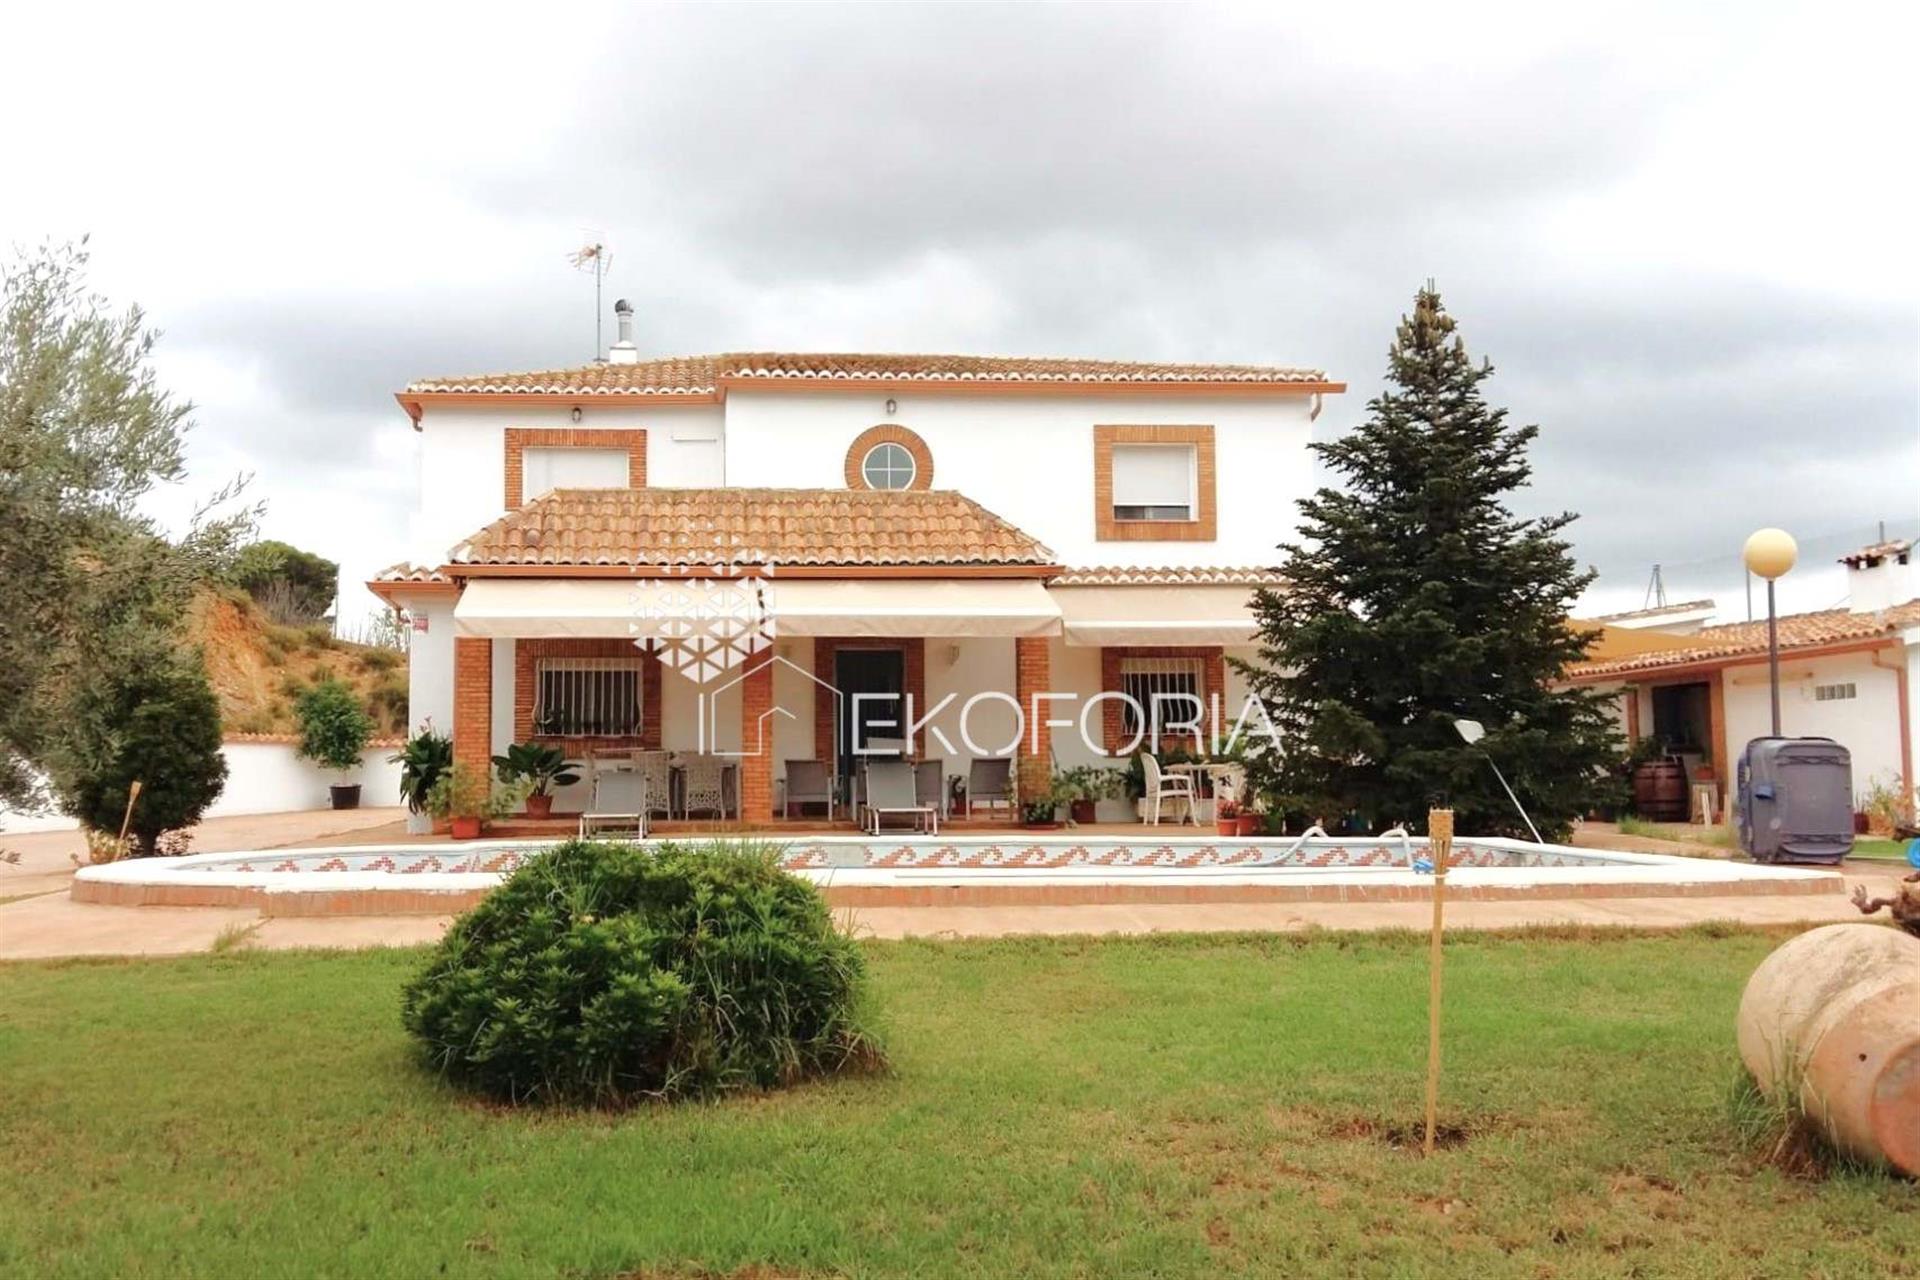 Villa With Panoramic Views And 5000 M2 Land